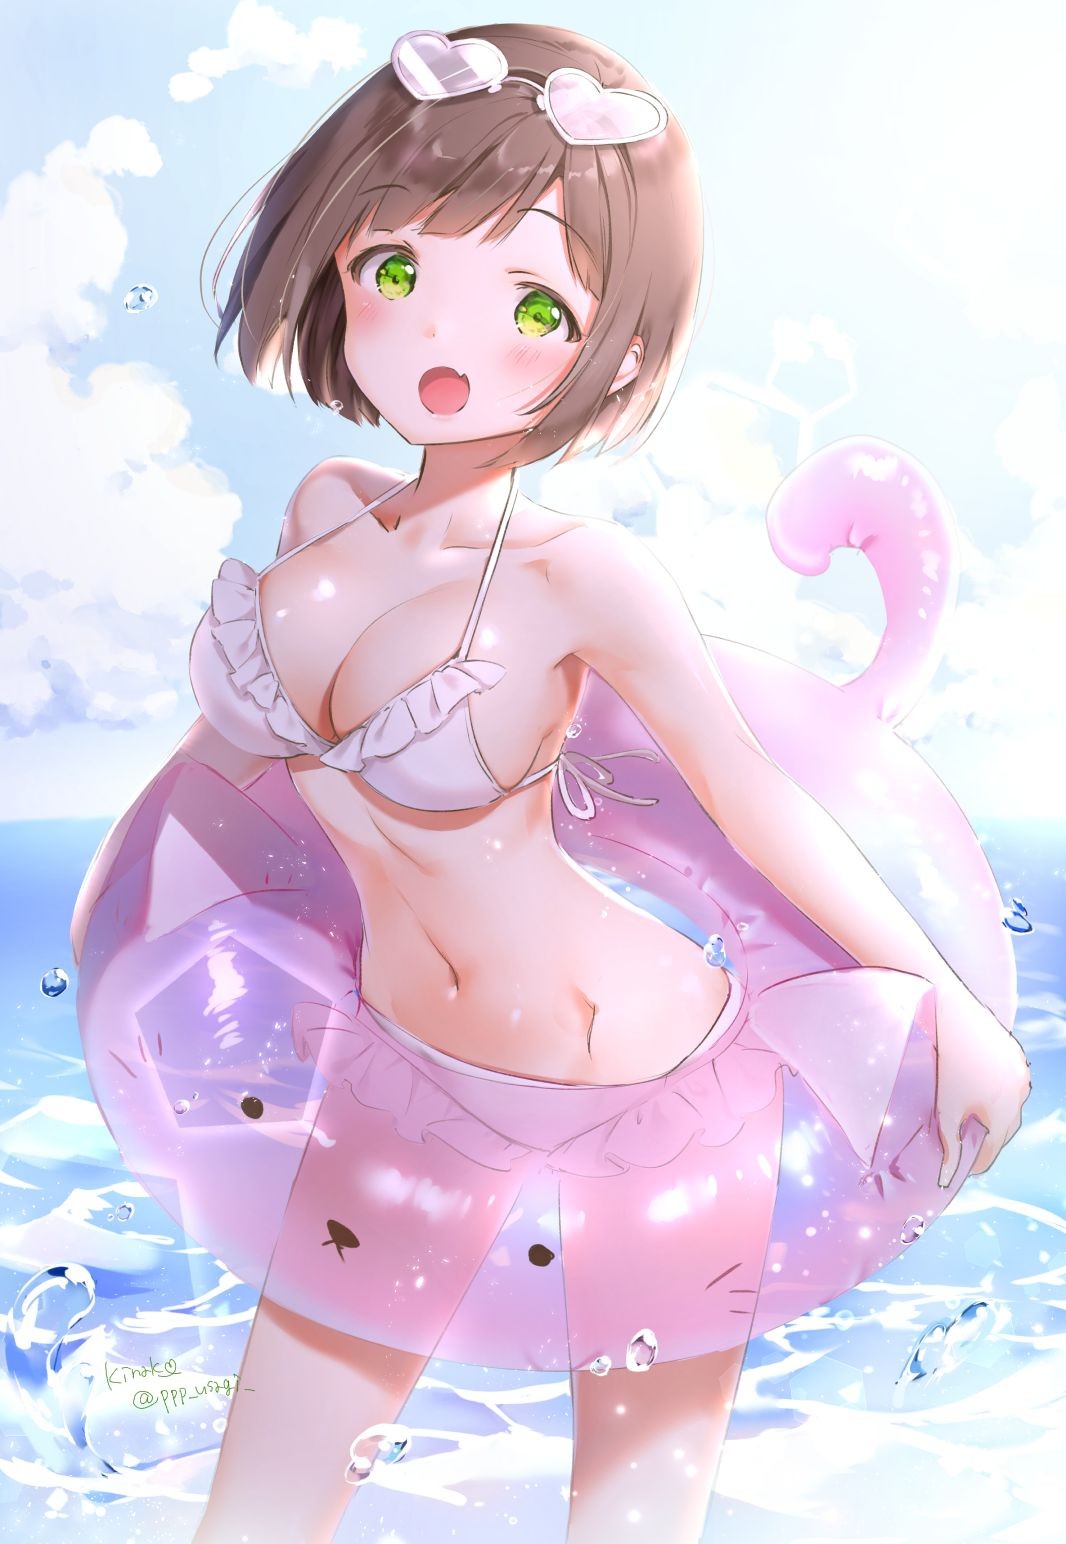 Pool [Secondary] Moe Images Of Swimsuit Girls Bathing In The Sea And Swimming Pool Korea